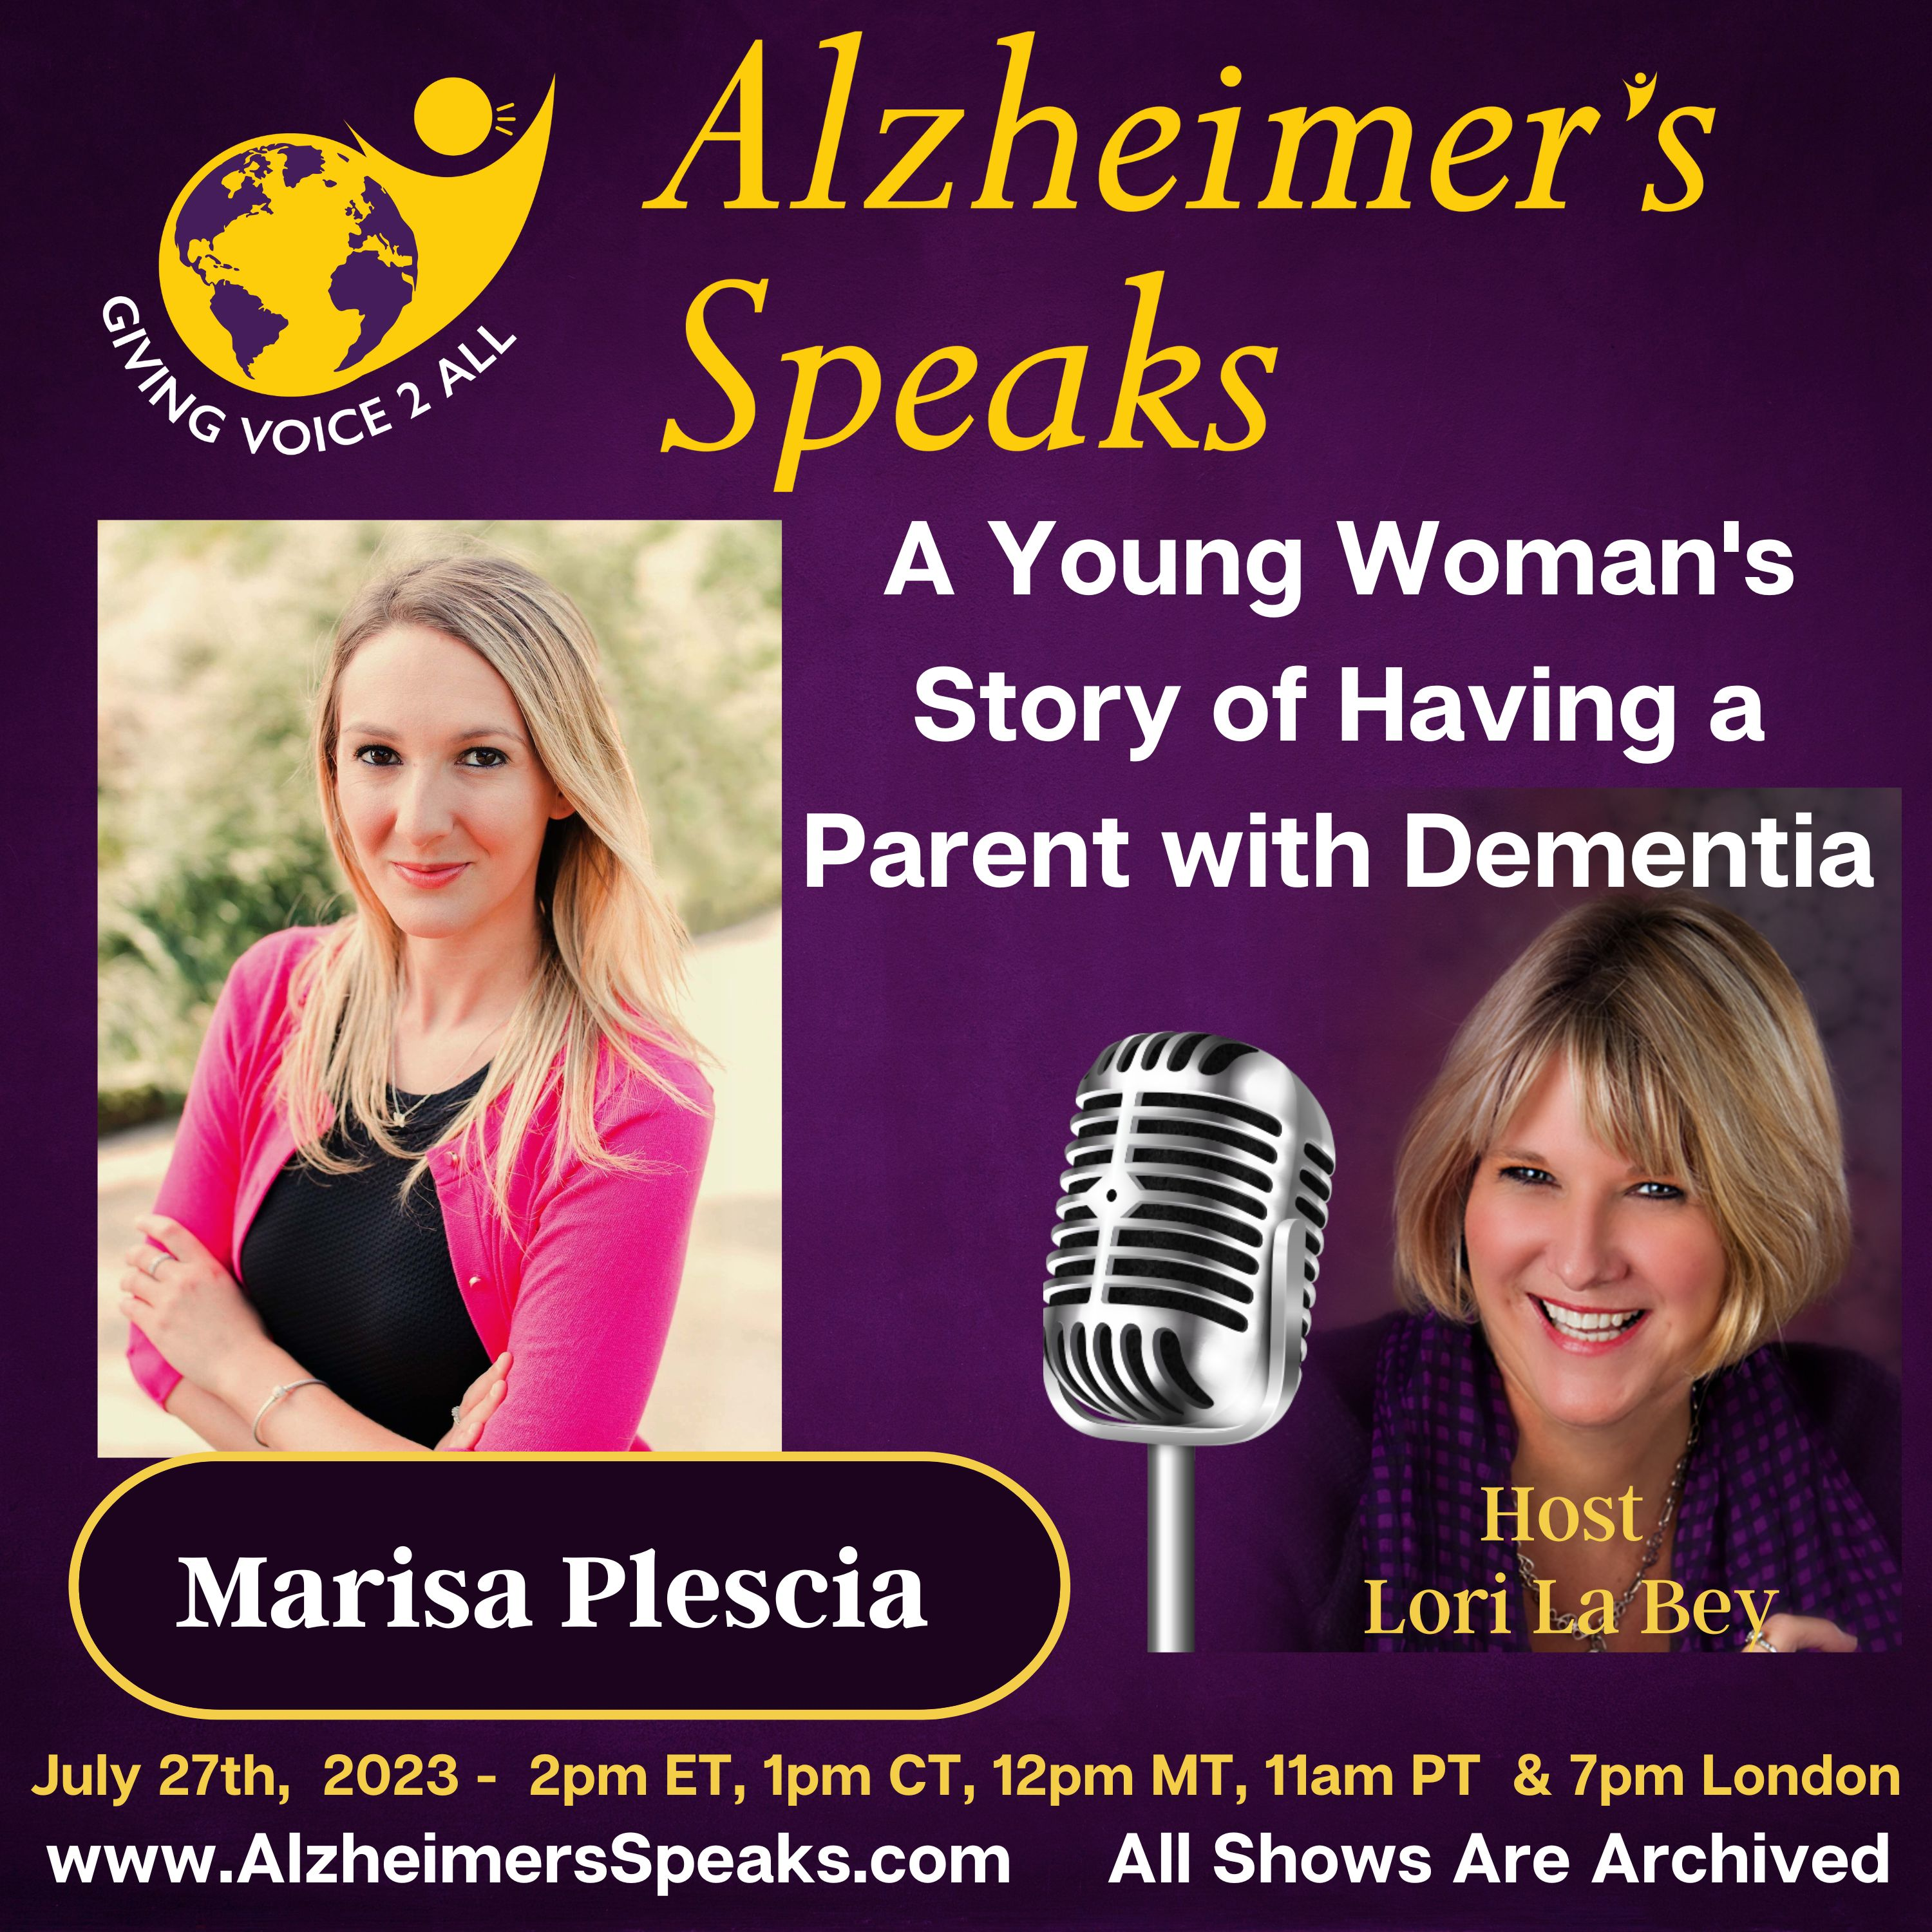 A Young Woman’s Story of Having a Parent with Dementia